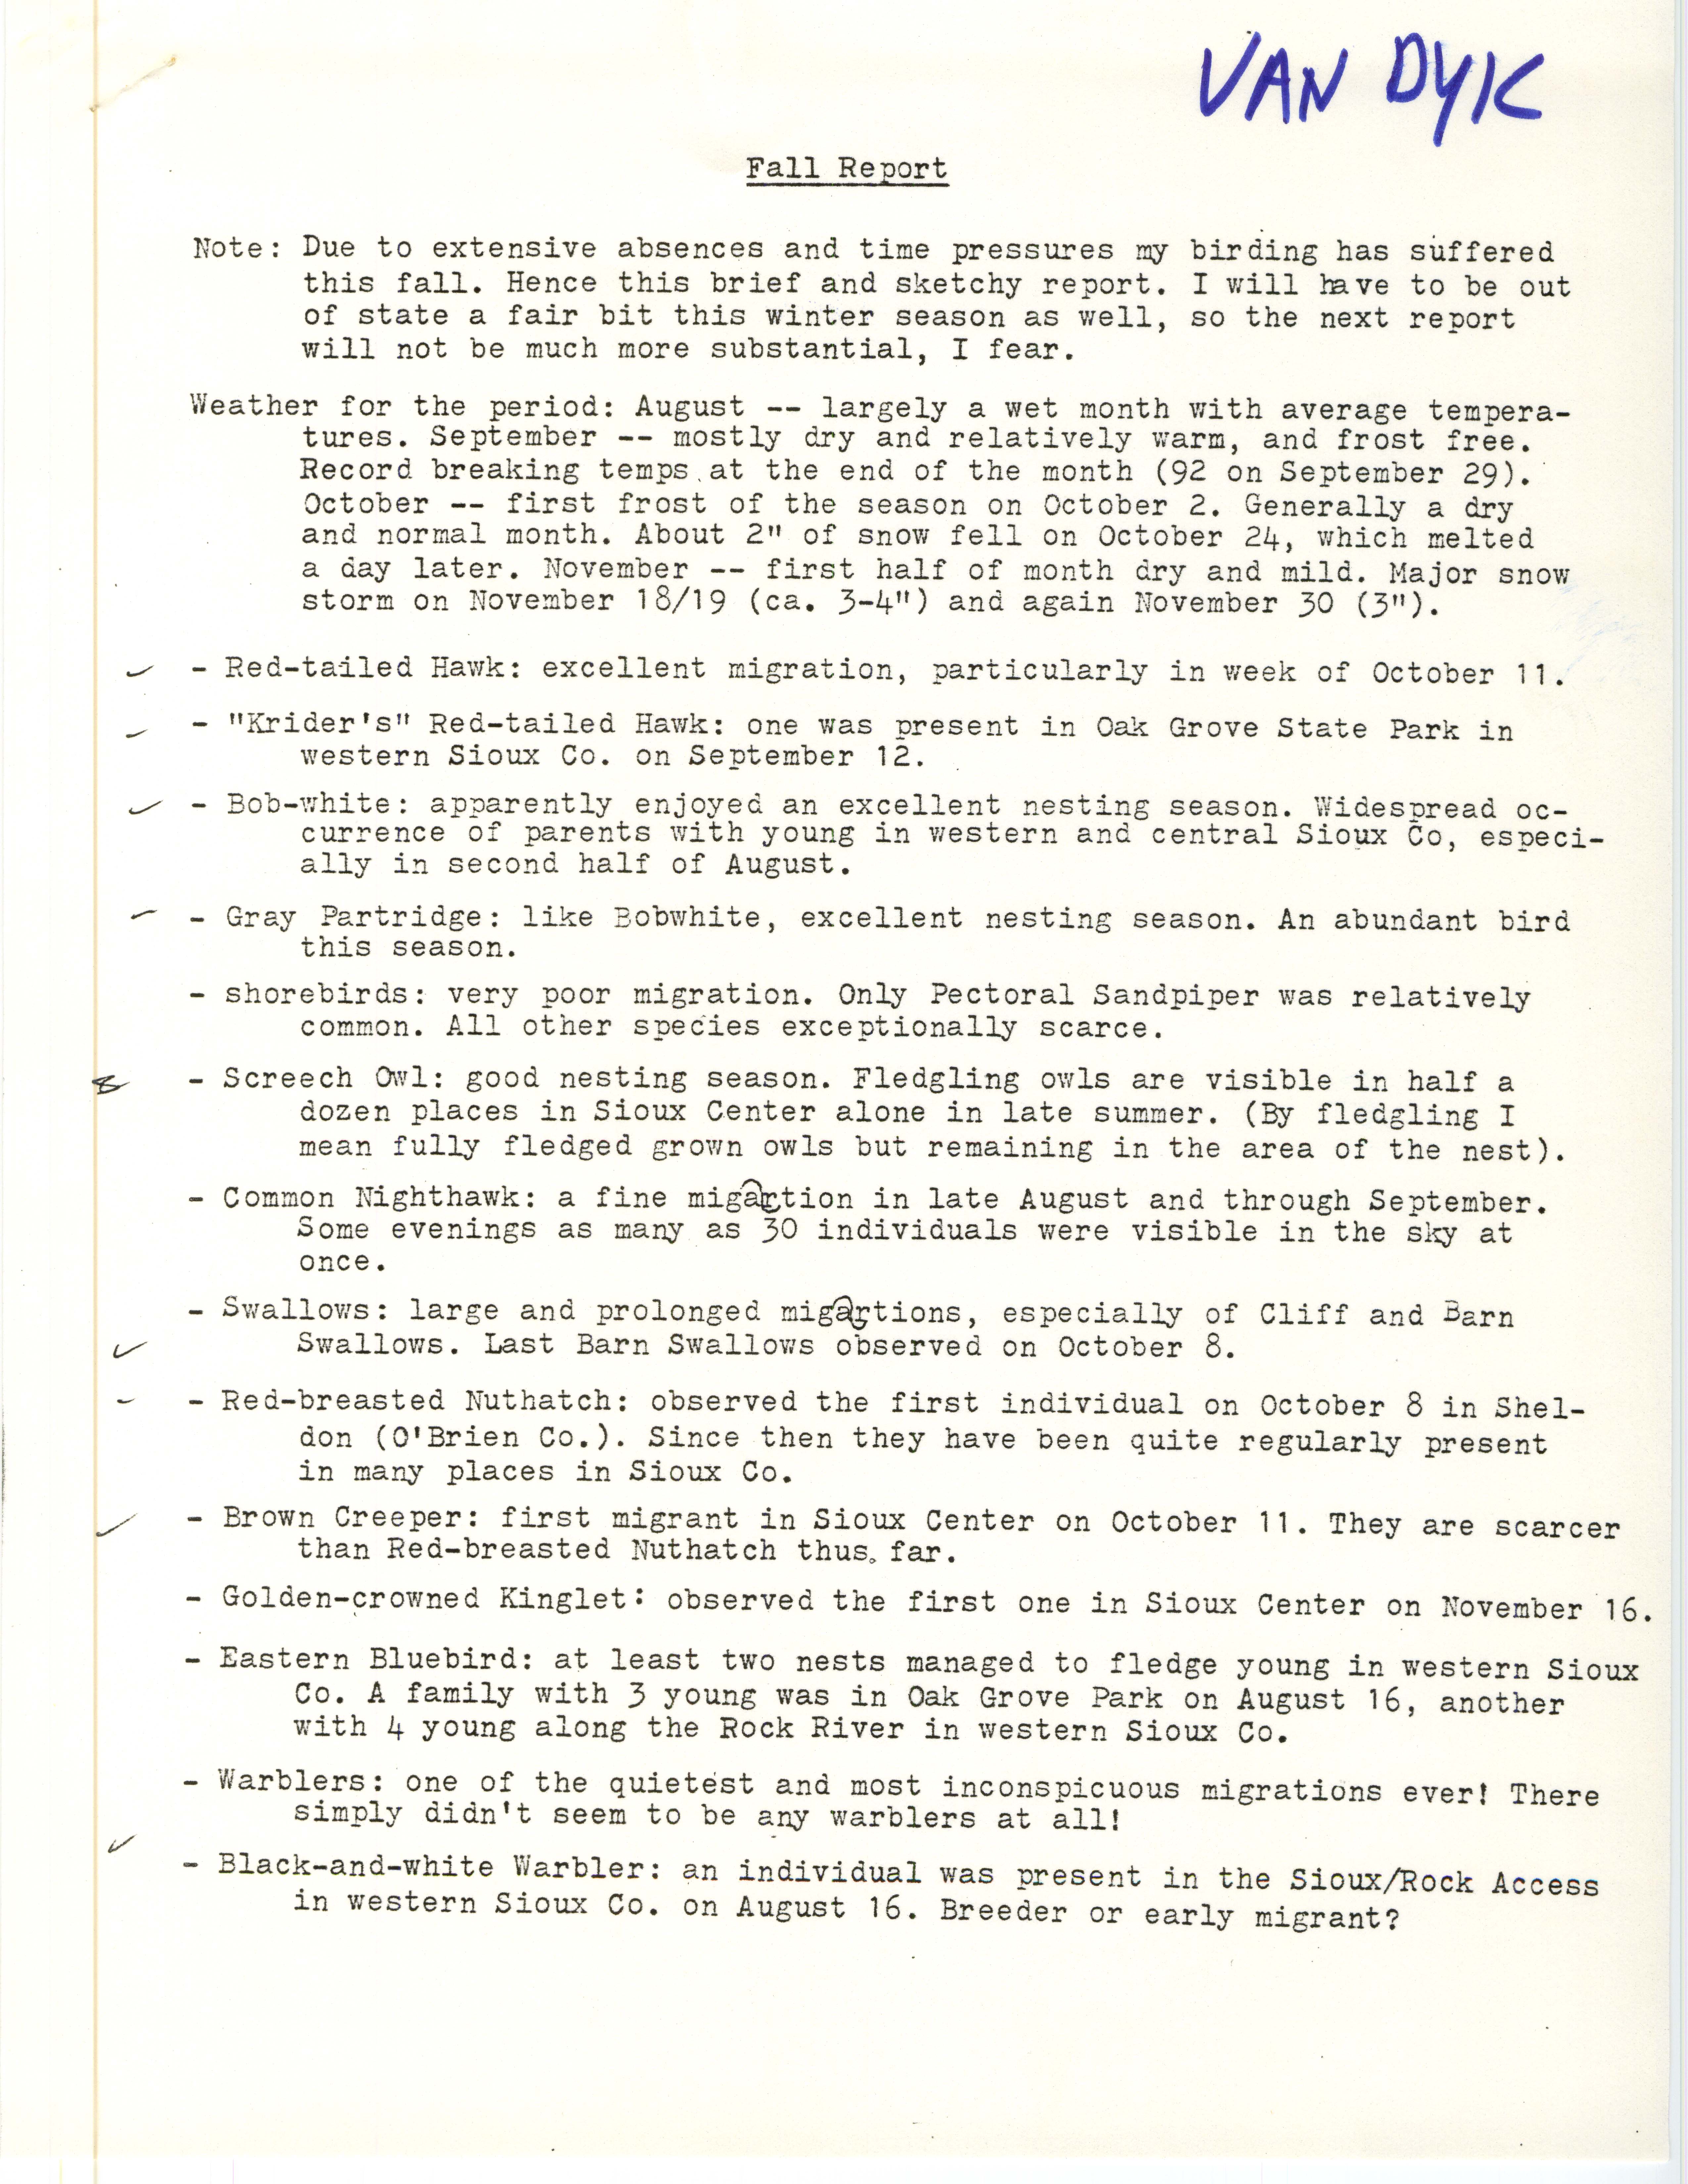 Field notes contributed by John Van Dyk, December 2, 1981